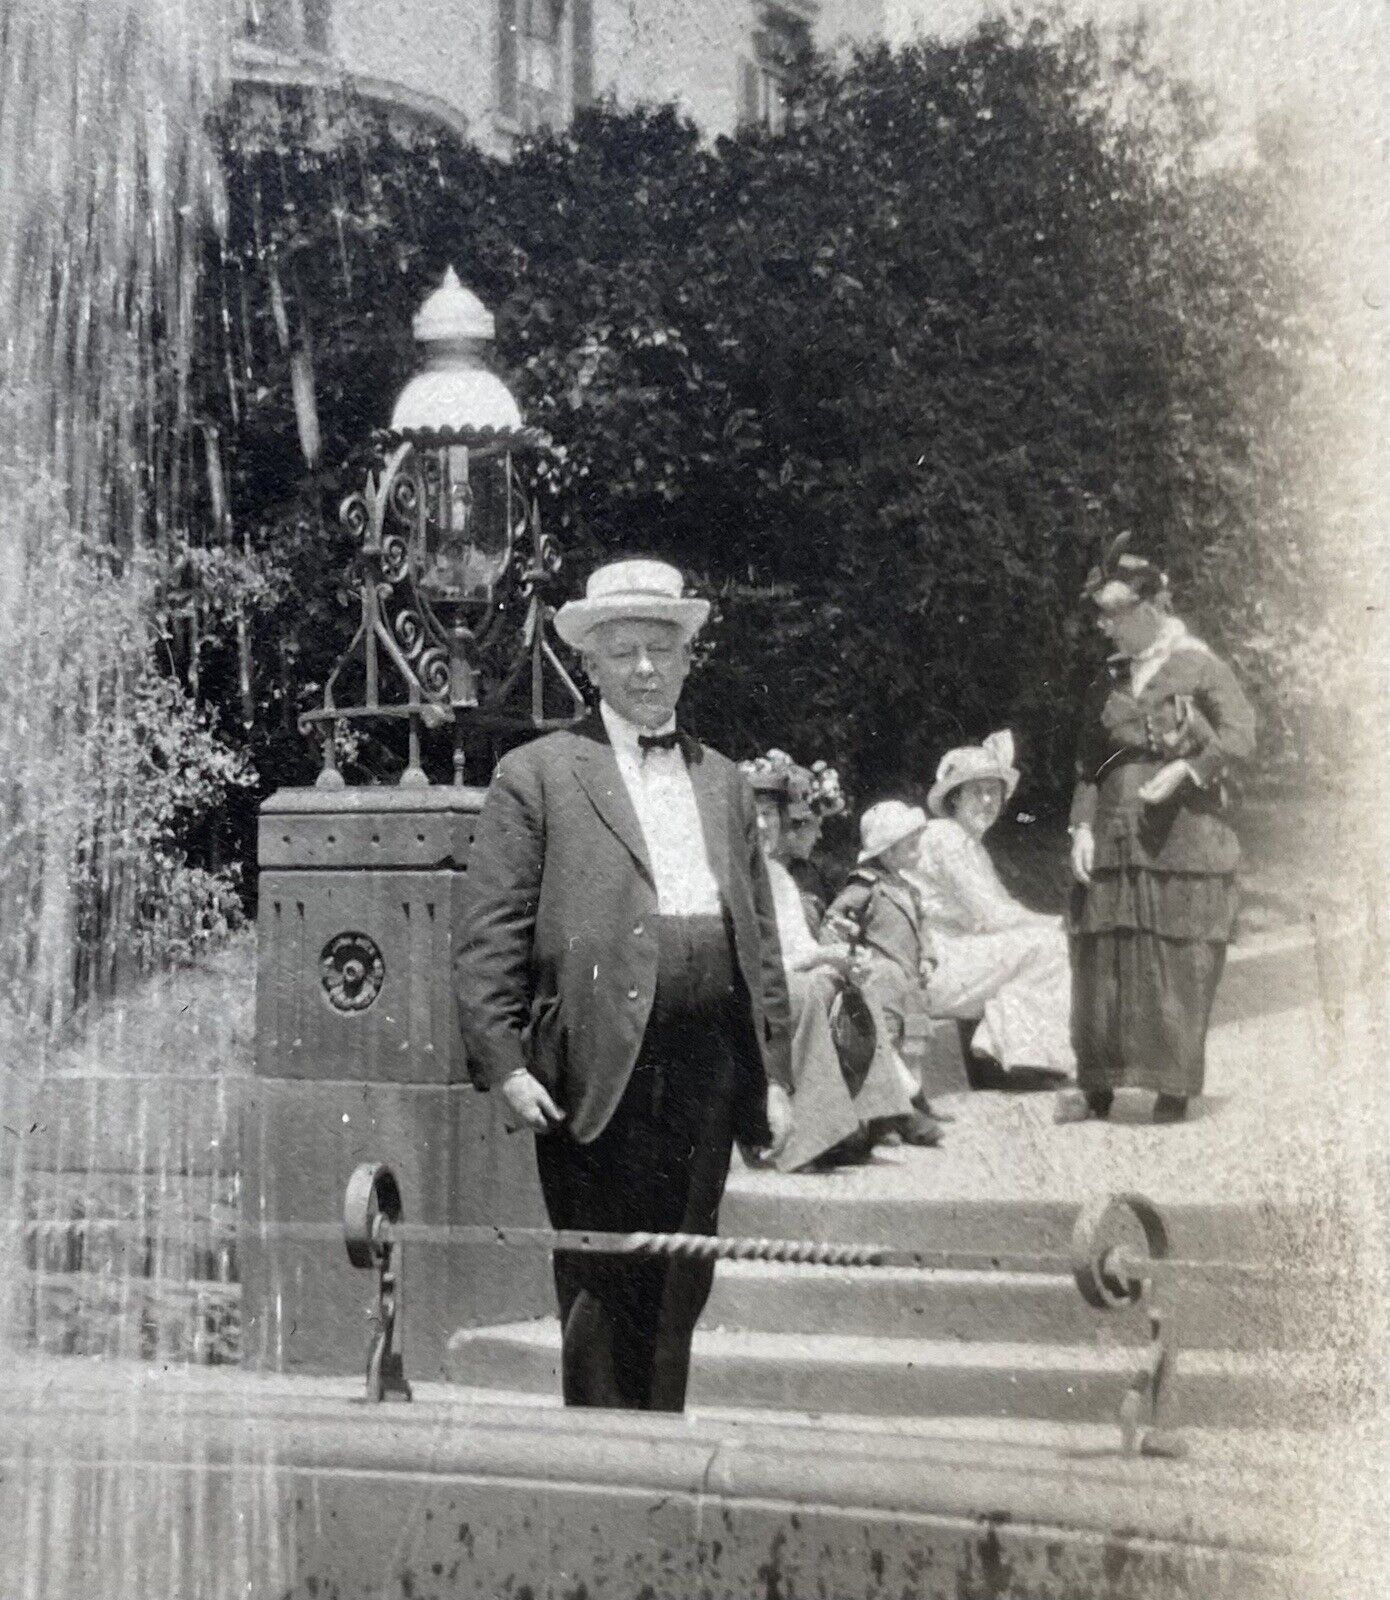 Maryland Baltimore 1912 Well Dressed People by a Water Fountain Antique Photo